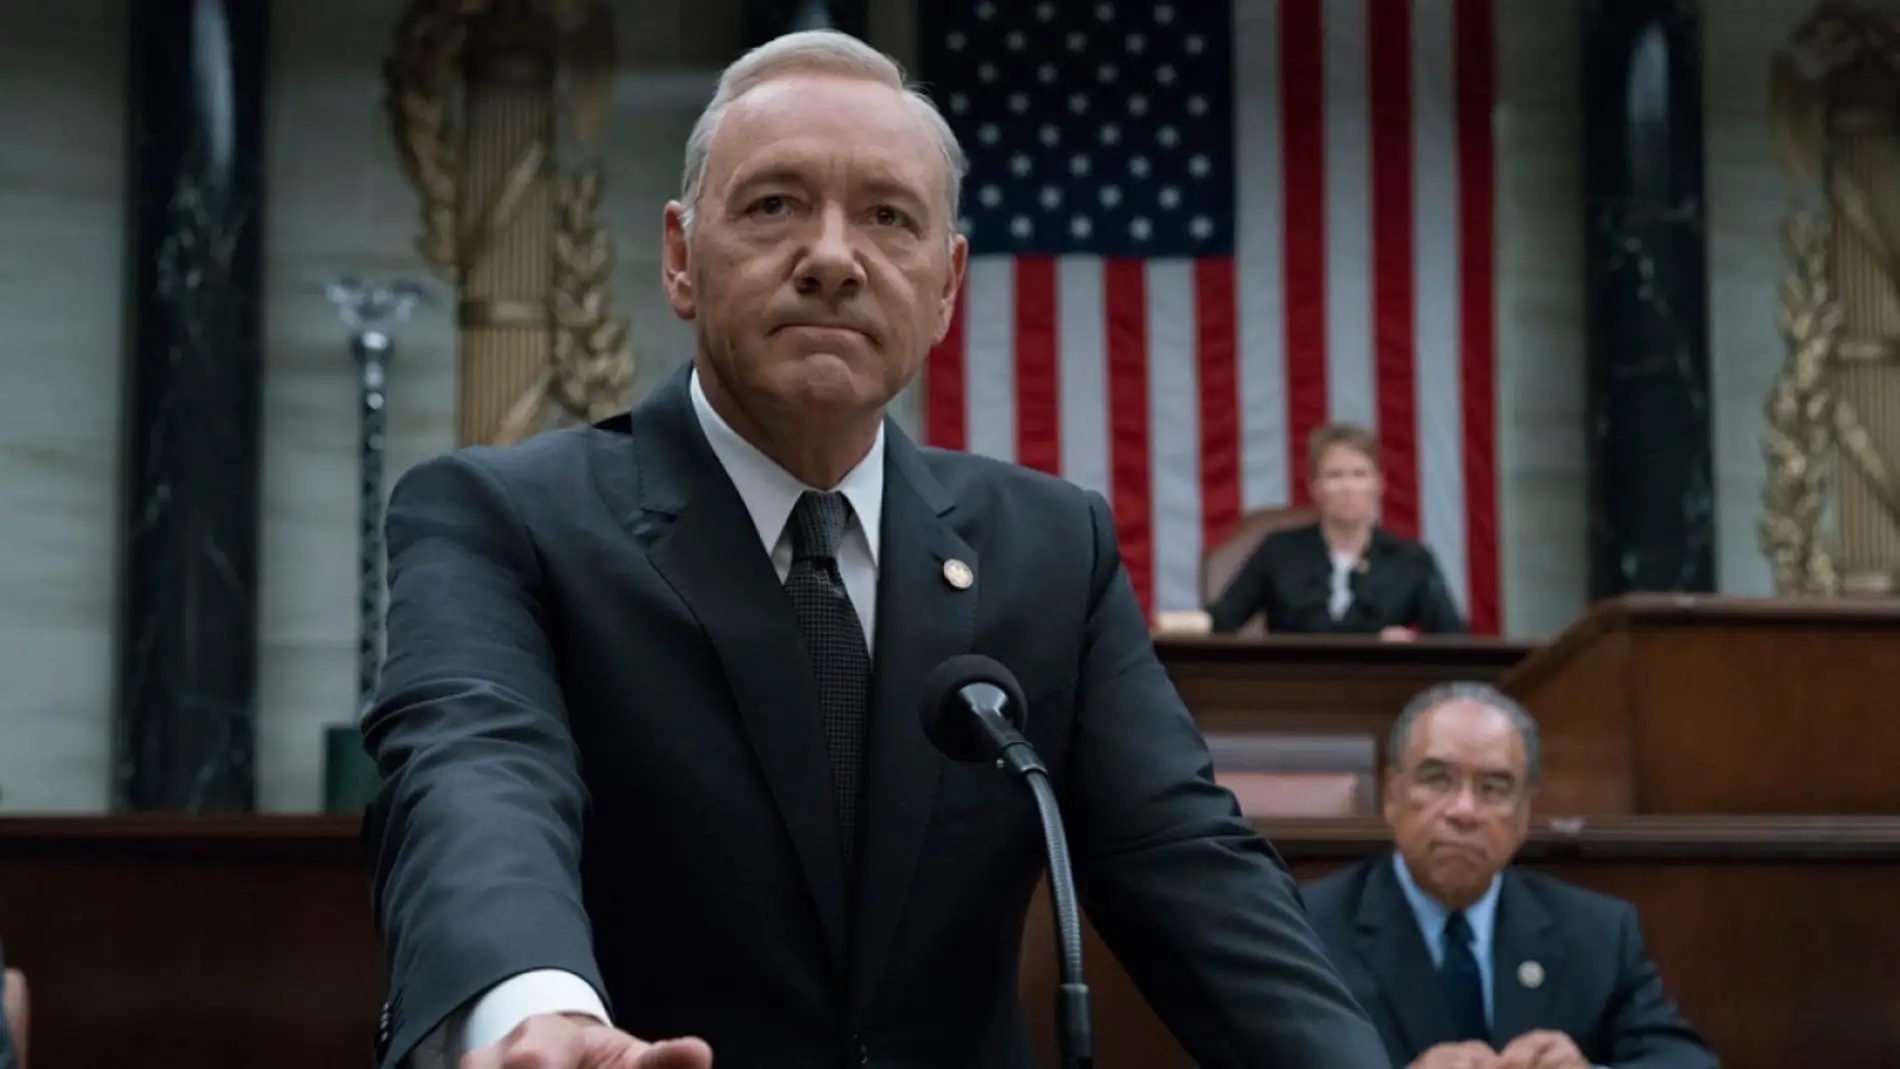 Kevin Spacey en 'House of Cards'